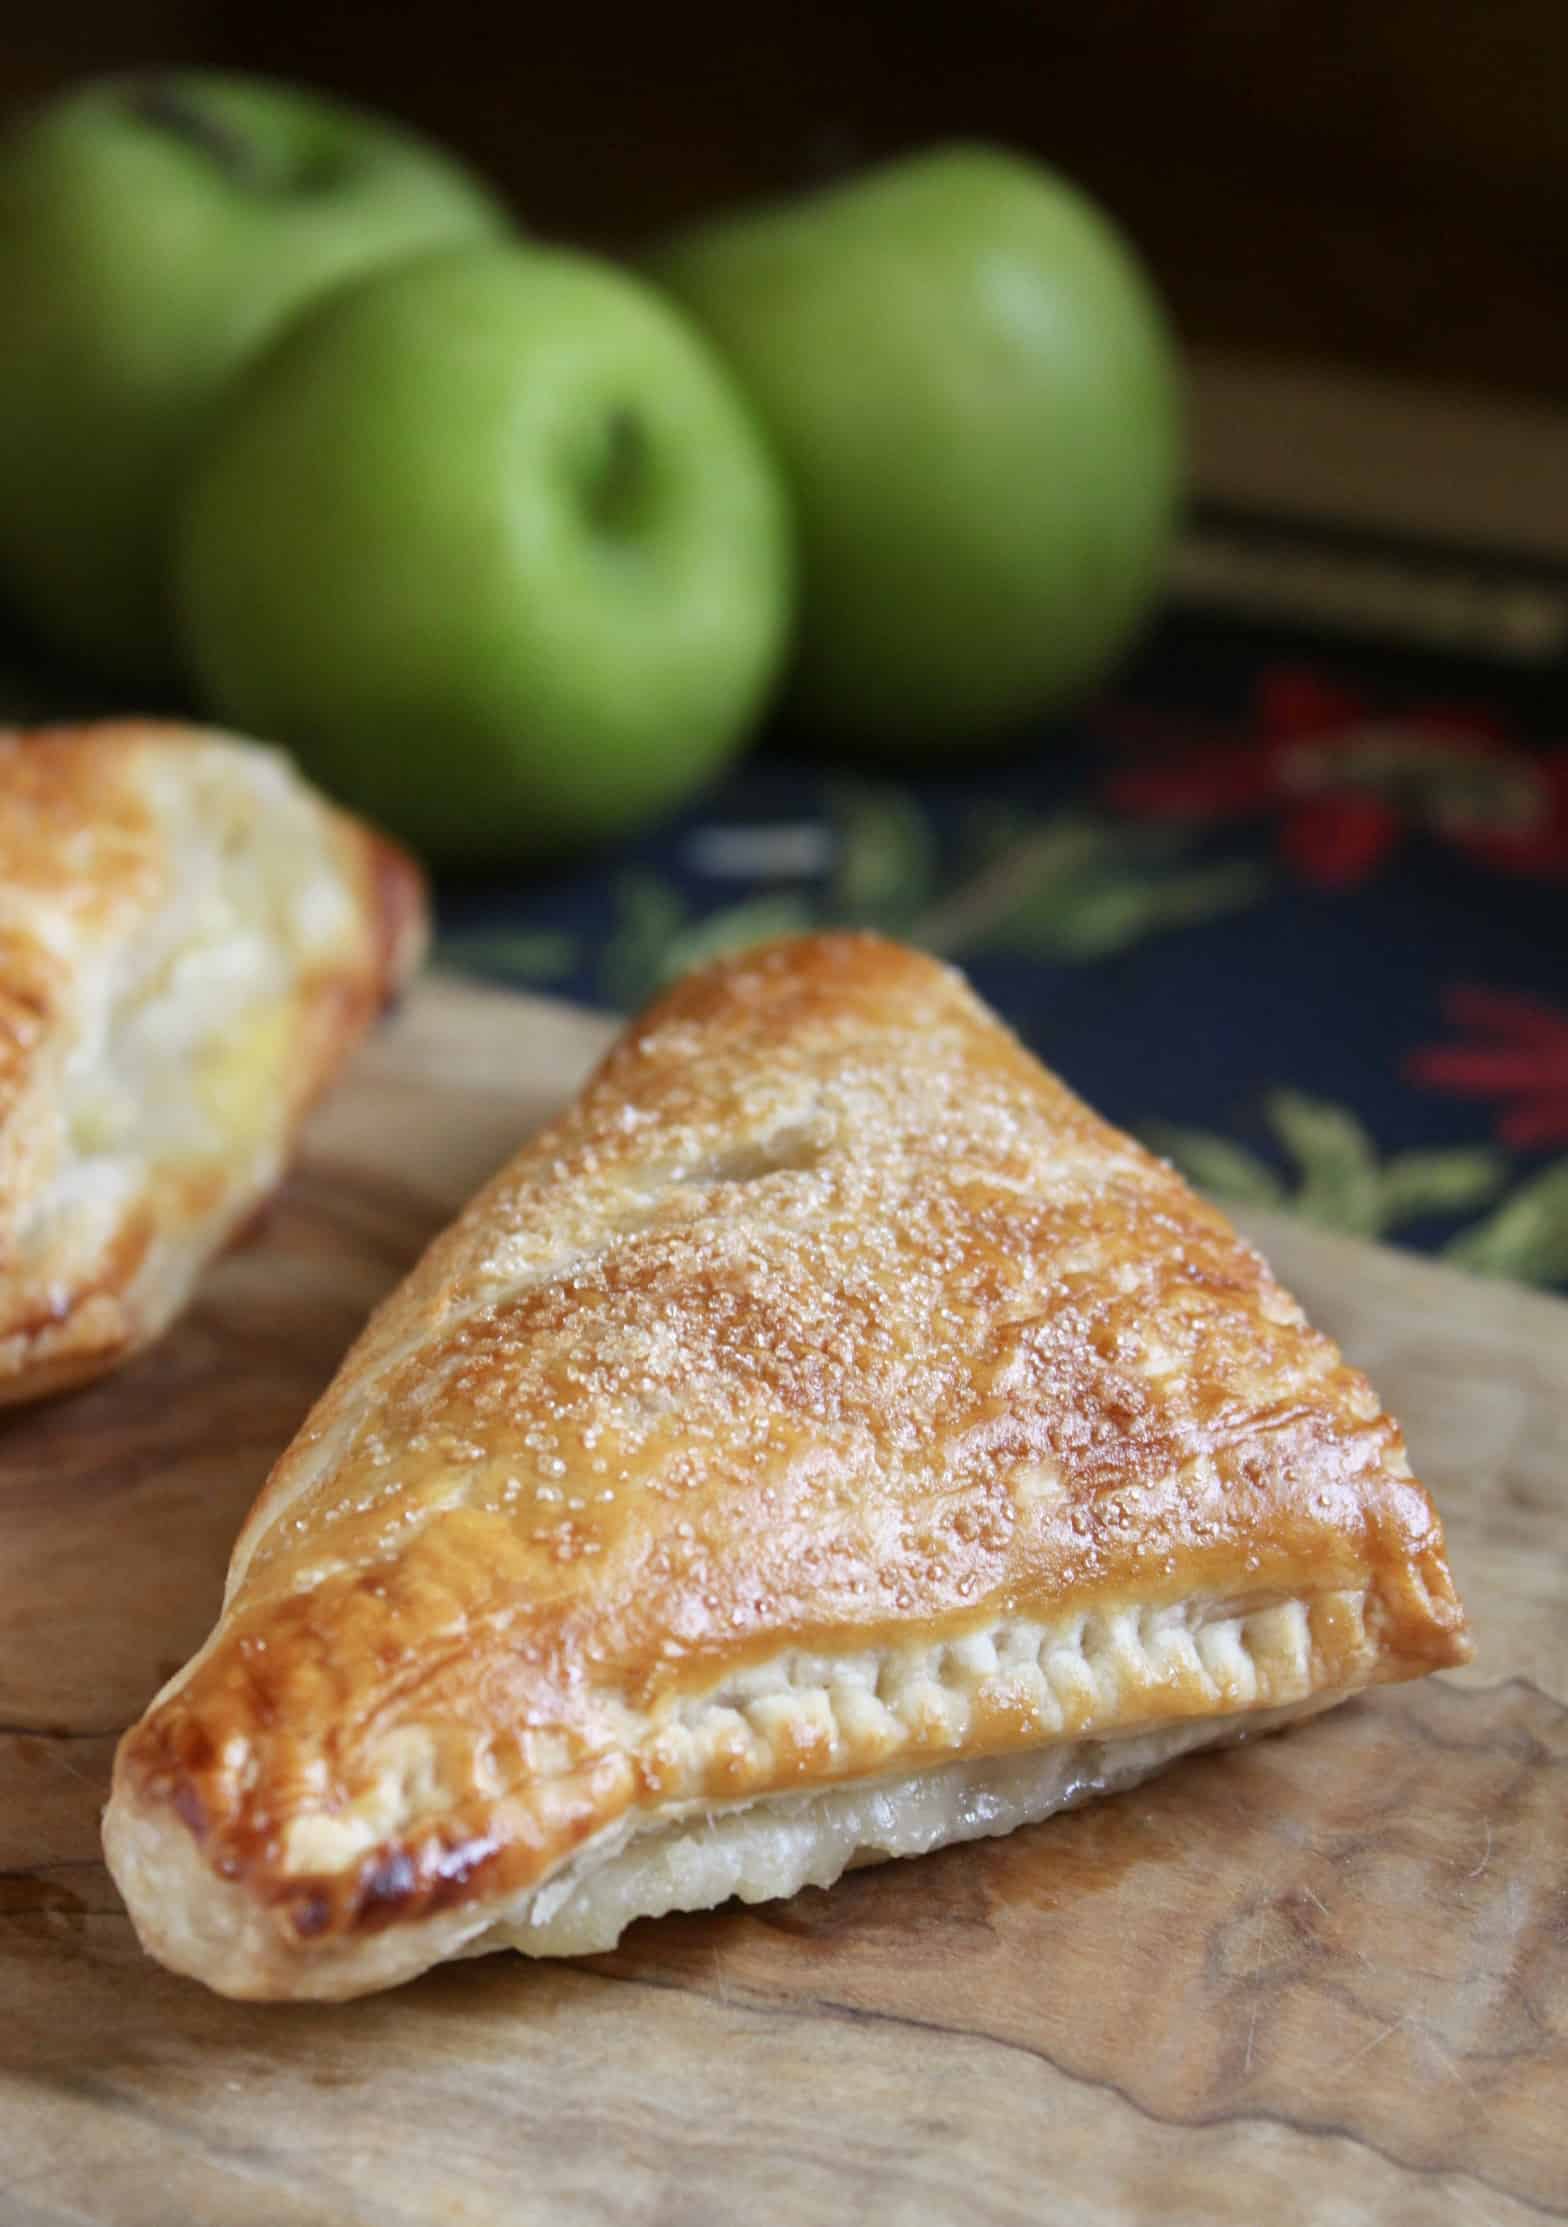 Apple Turnover Recipe (with Puff Pastry) - Christina's Cucina